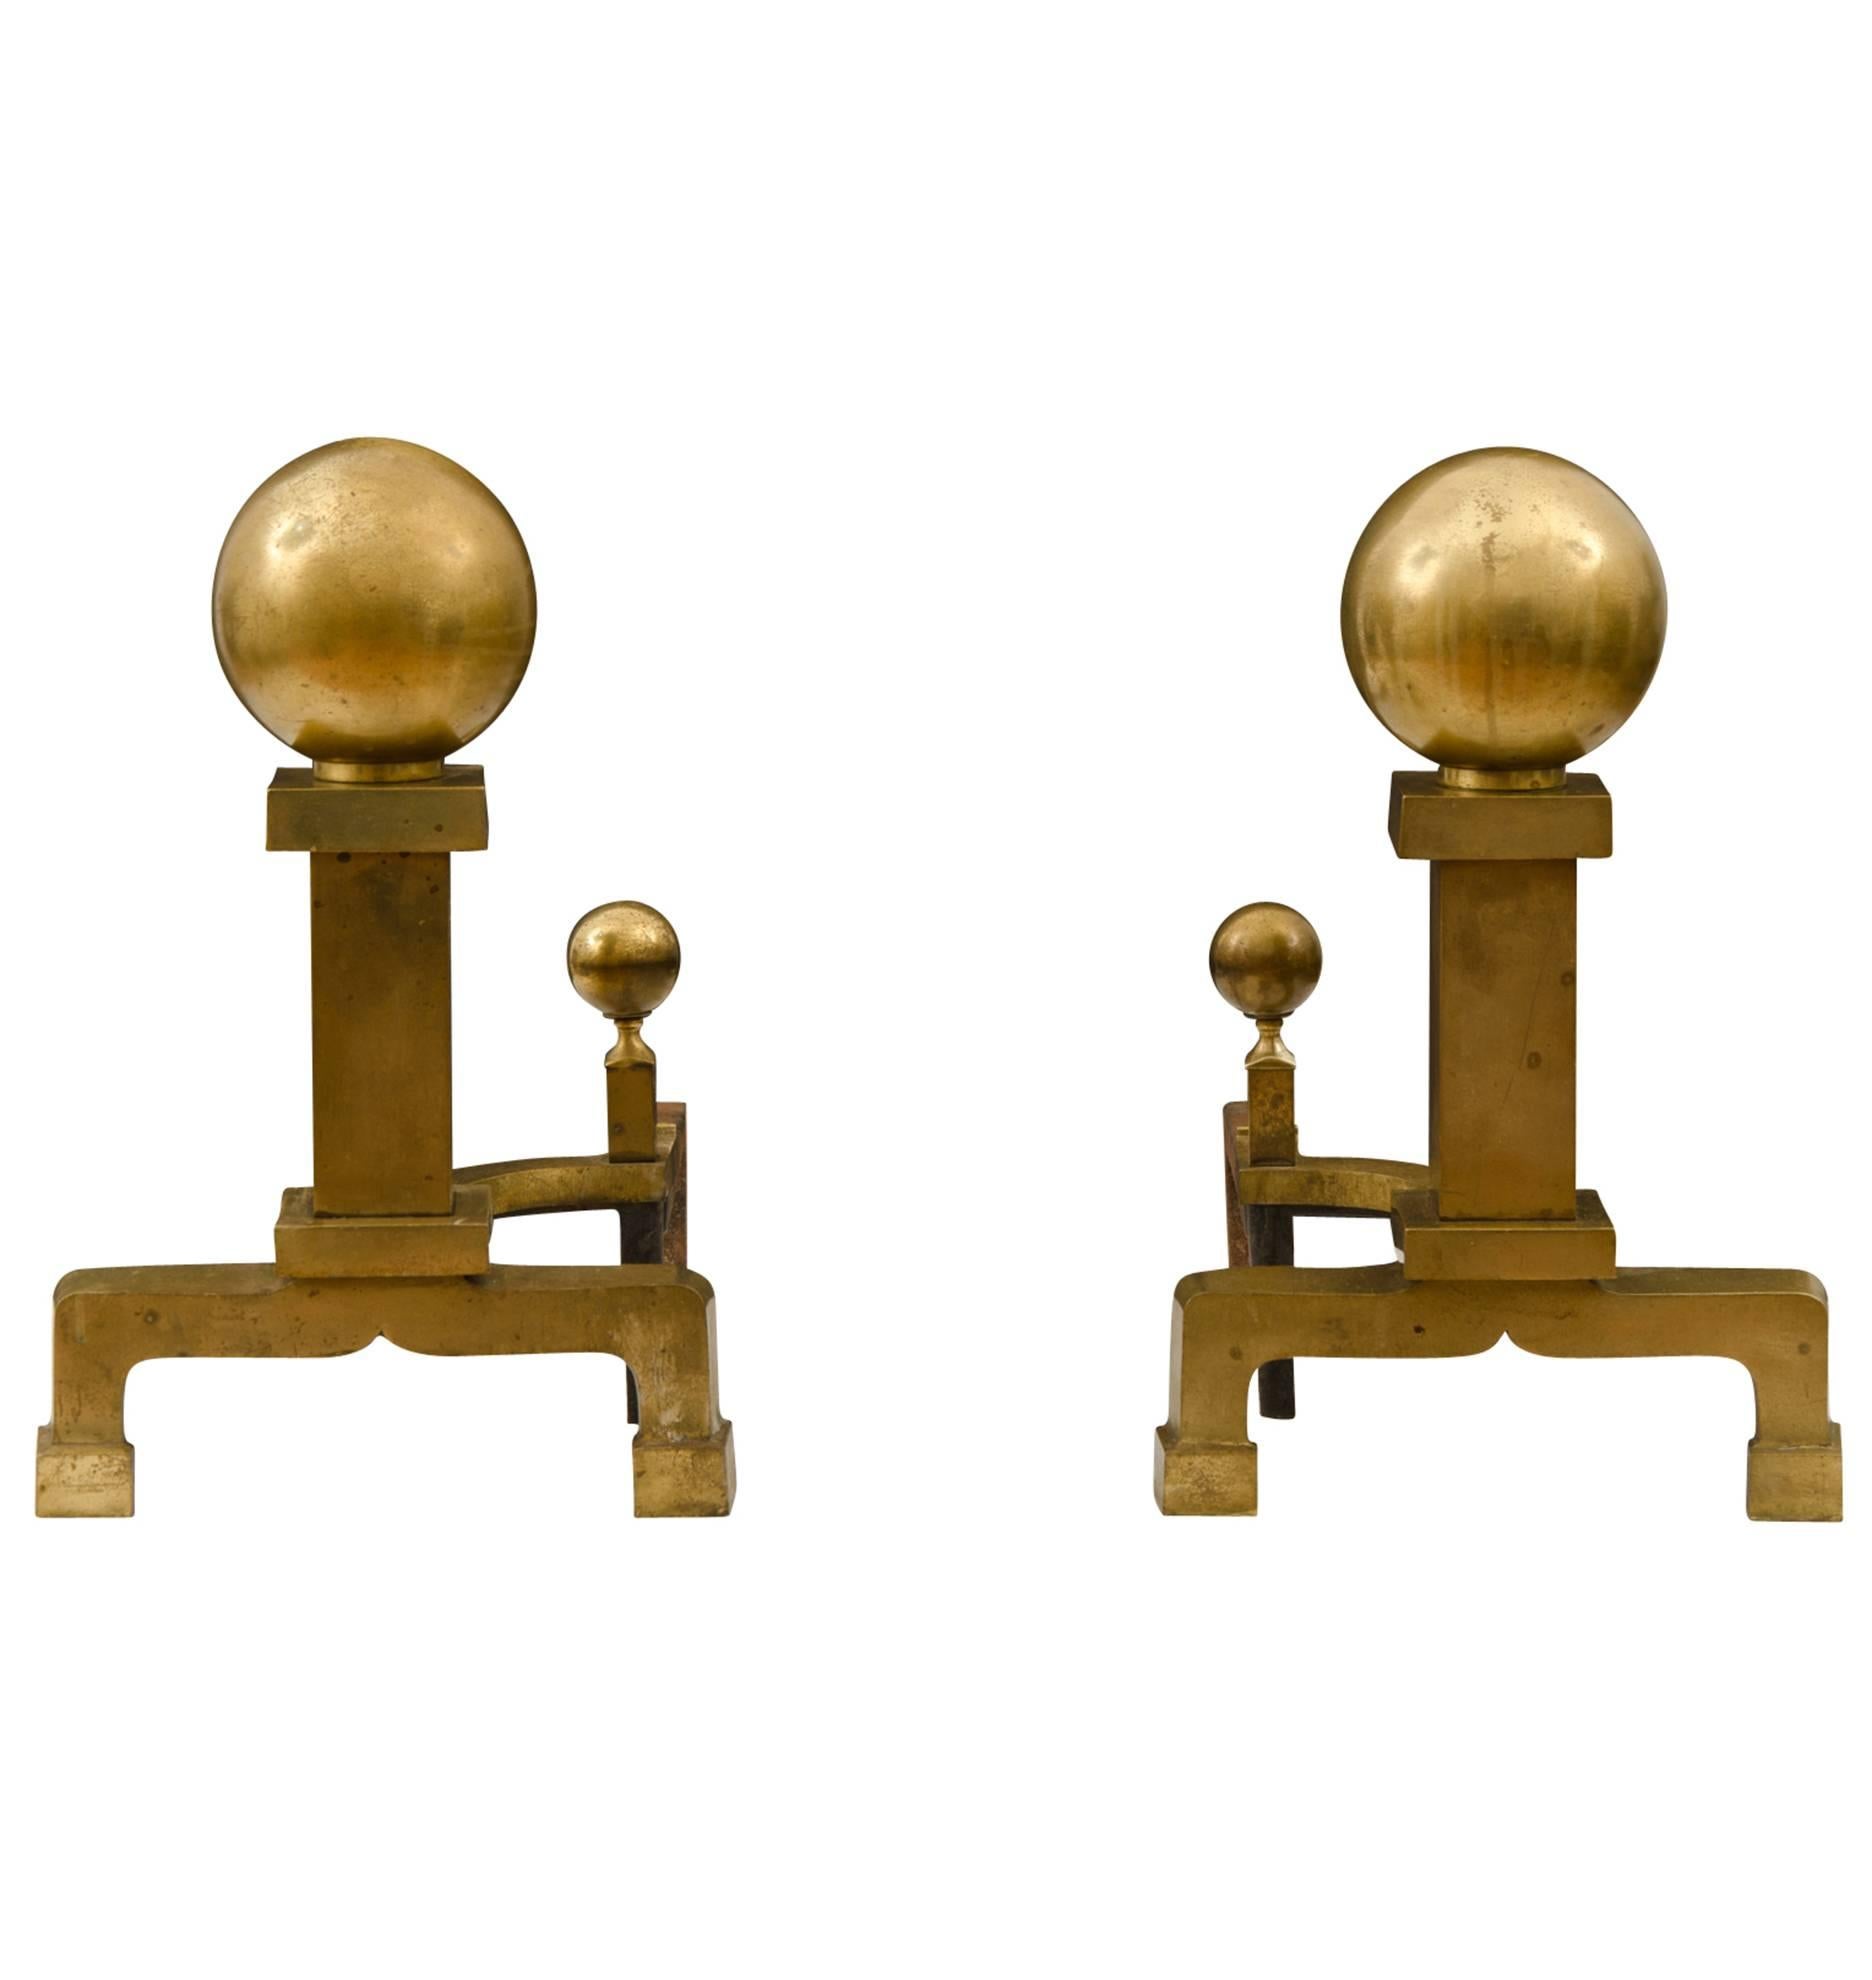 This pair of New England cast brass andirons dates back to the mid-19th century and comes with all of the wonderful symmetry and stately simplicity of the Federal period. They have even more history than that, though: these came from the estate of